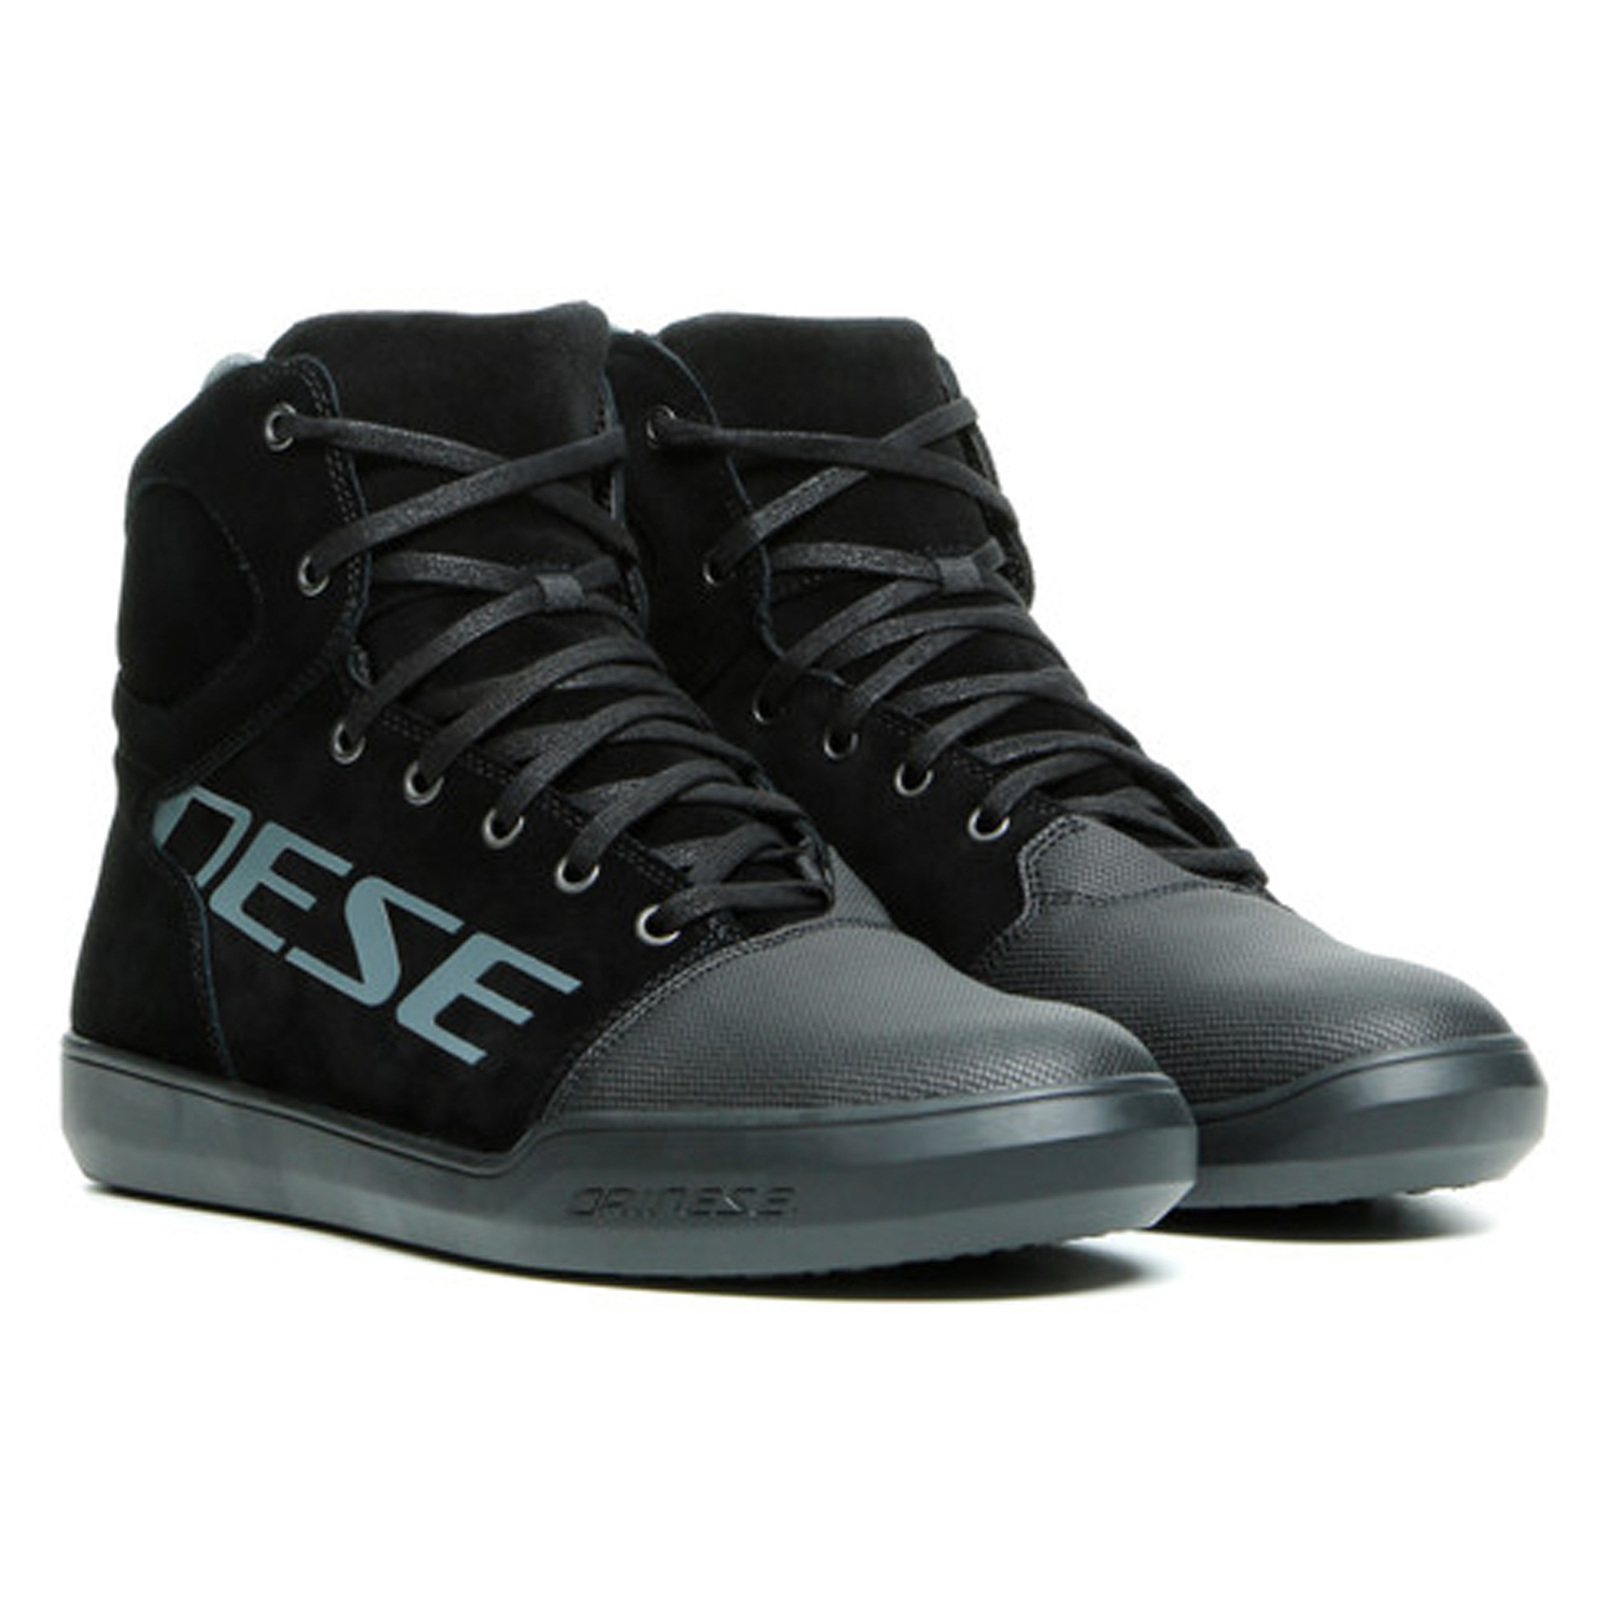 DAINESE YORK D-WP SHOES BLACK/ANTHRACITE/40